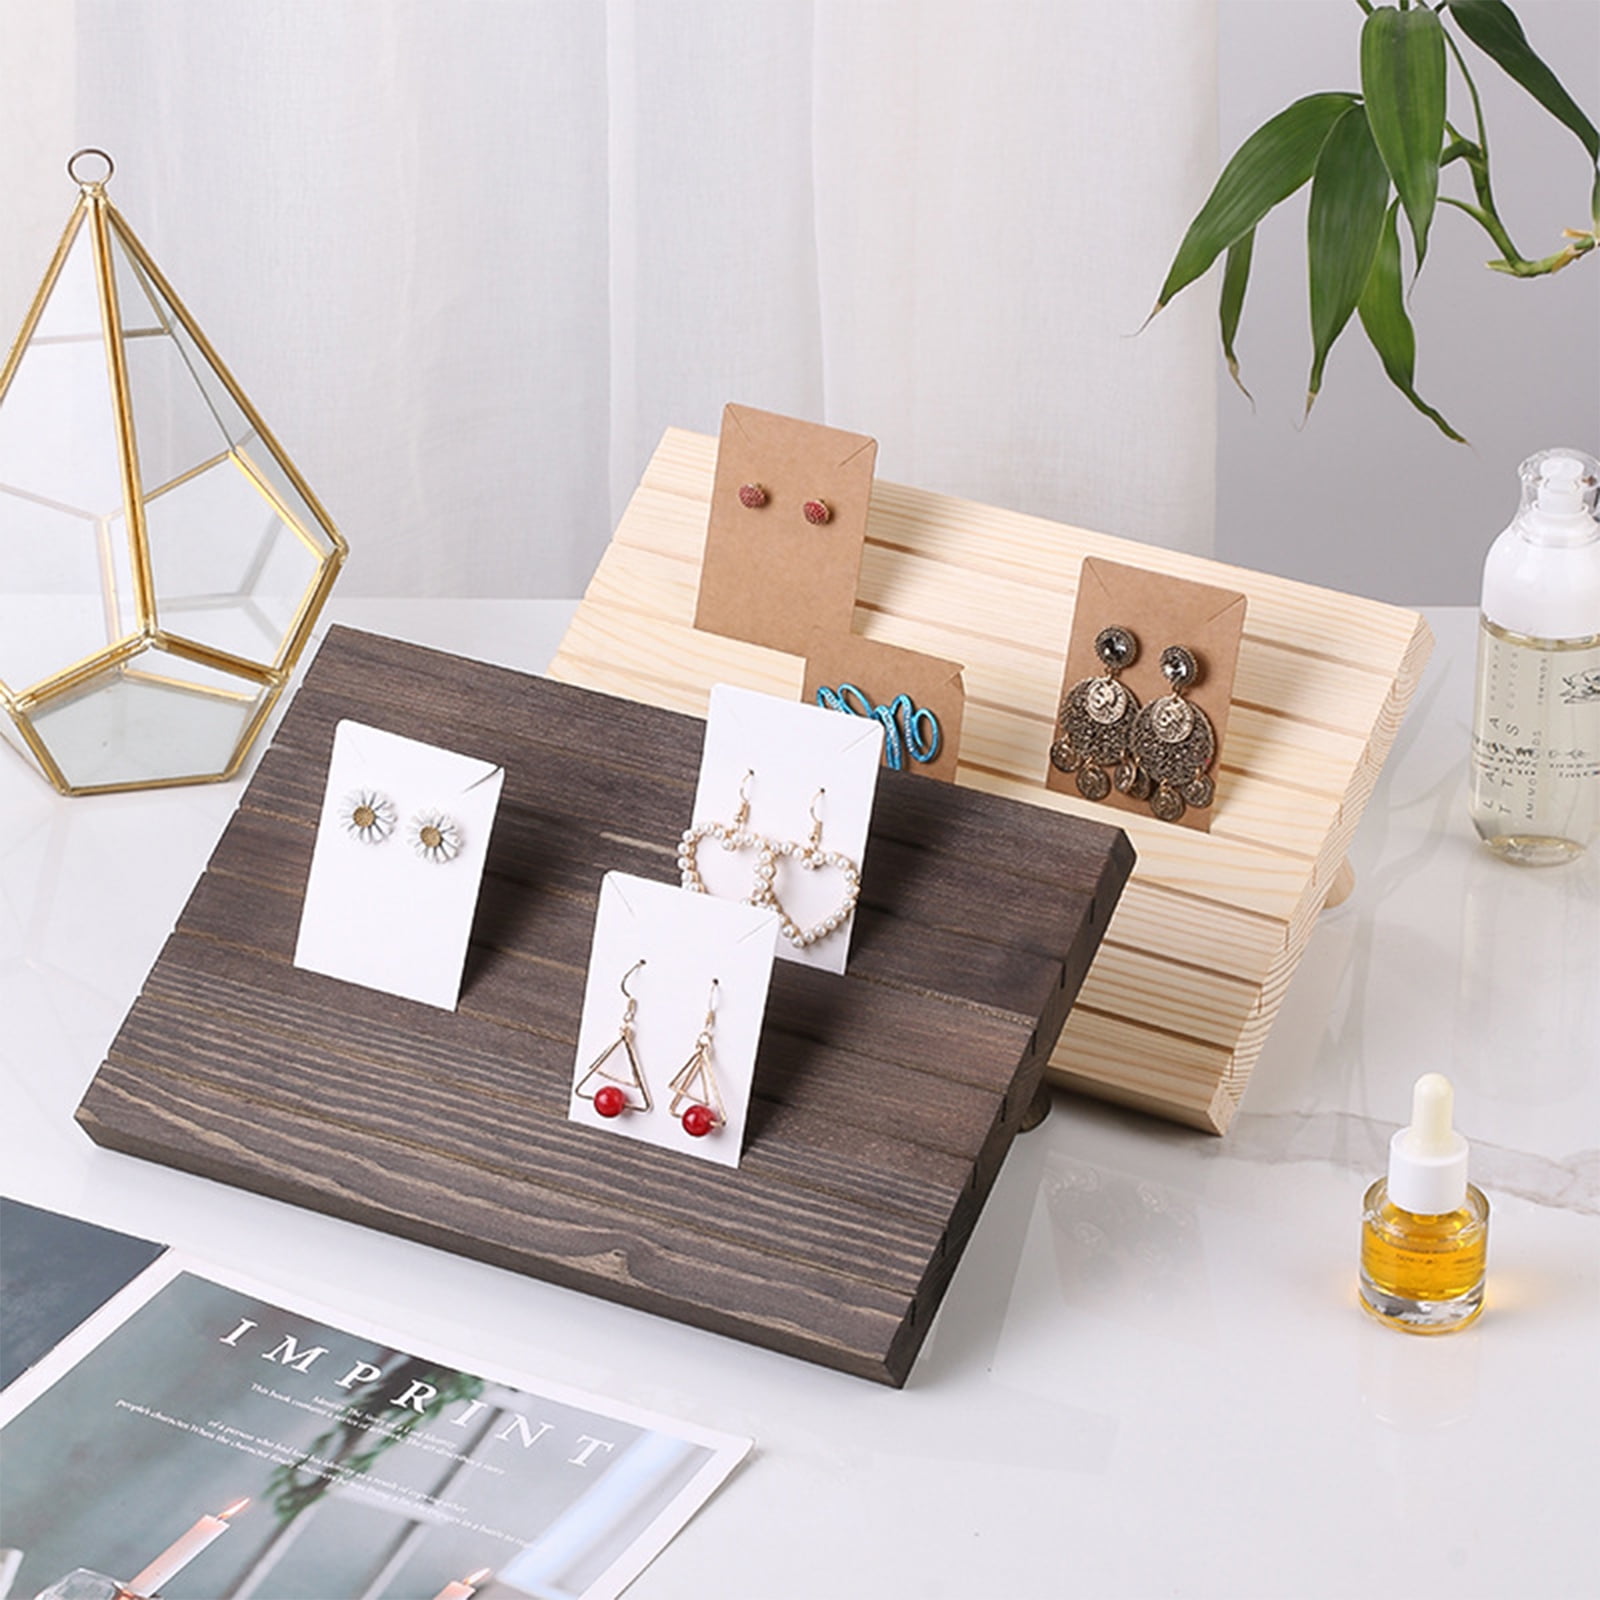 Ymam.Light Jewelry Earring Display Stands for Selling - Wooden Earring Card  Holder with 10PCS Earring Cardboard (Blue) 